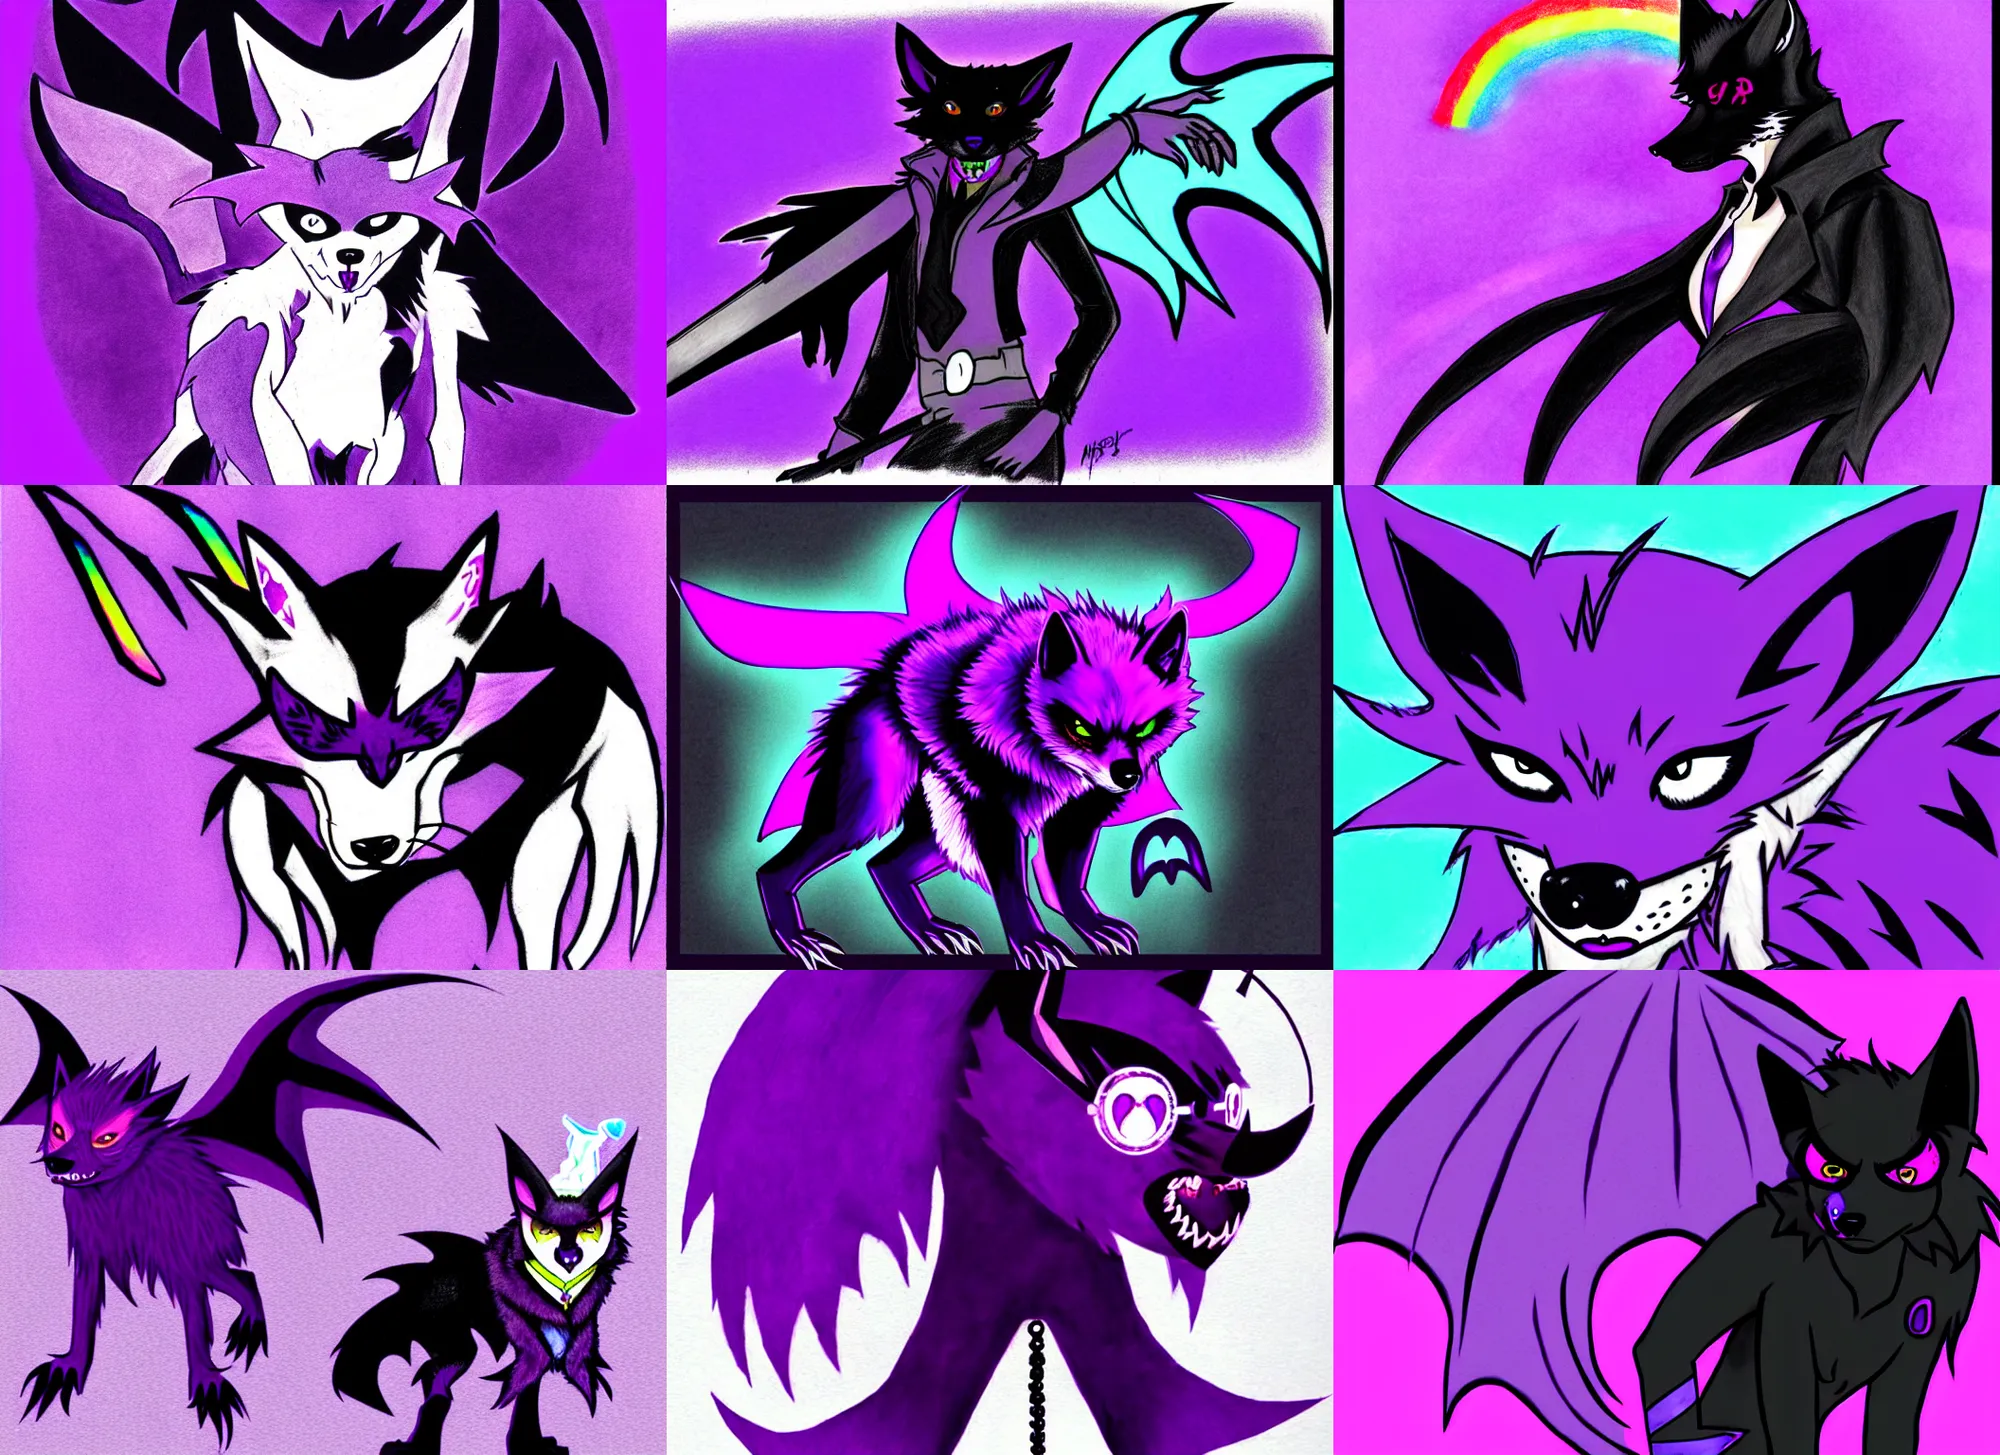 Prompt: a purple wolfbat fursona with an eyepatch and a rainbow tail, drawn in a noir style, reminescent of max payne and ghost in the shell, style of purple rain album cover ( by prince ), dark colors